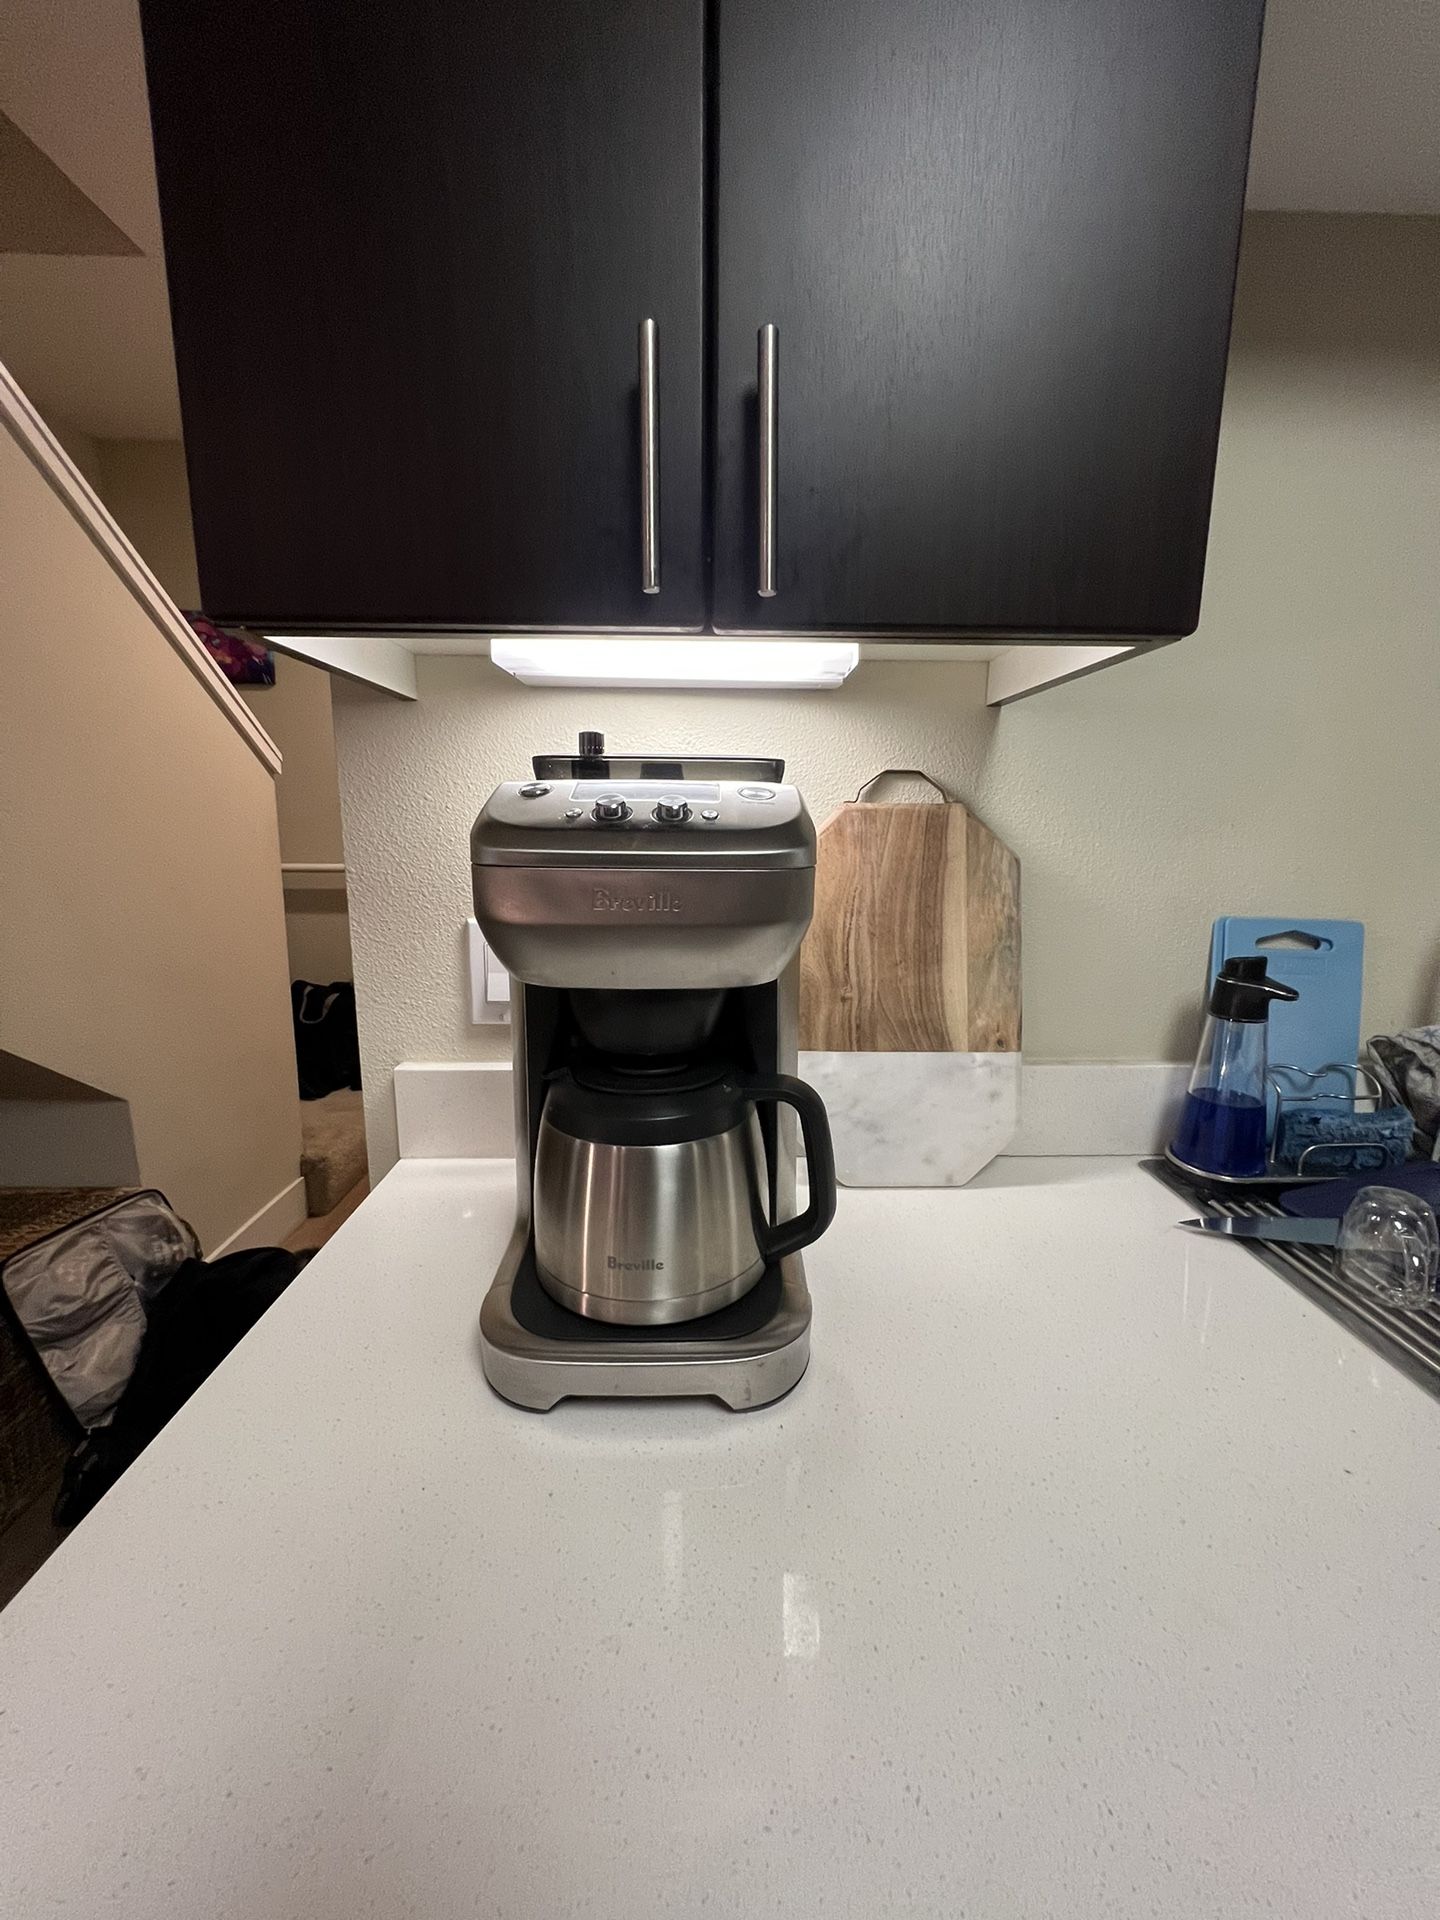 Breville Grind Control 12-Cup Coffee Maker for Sale in San Jose, CA -  OfferUp